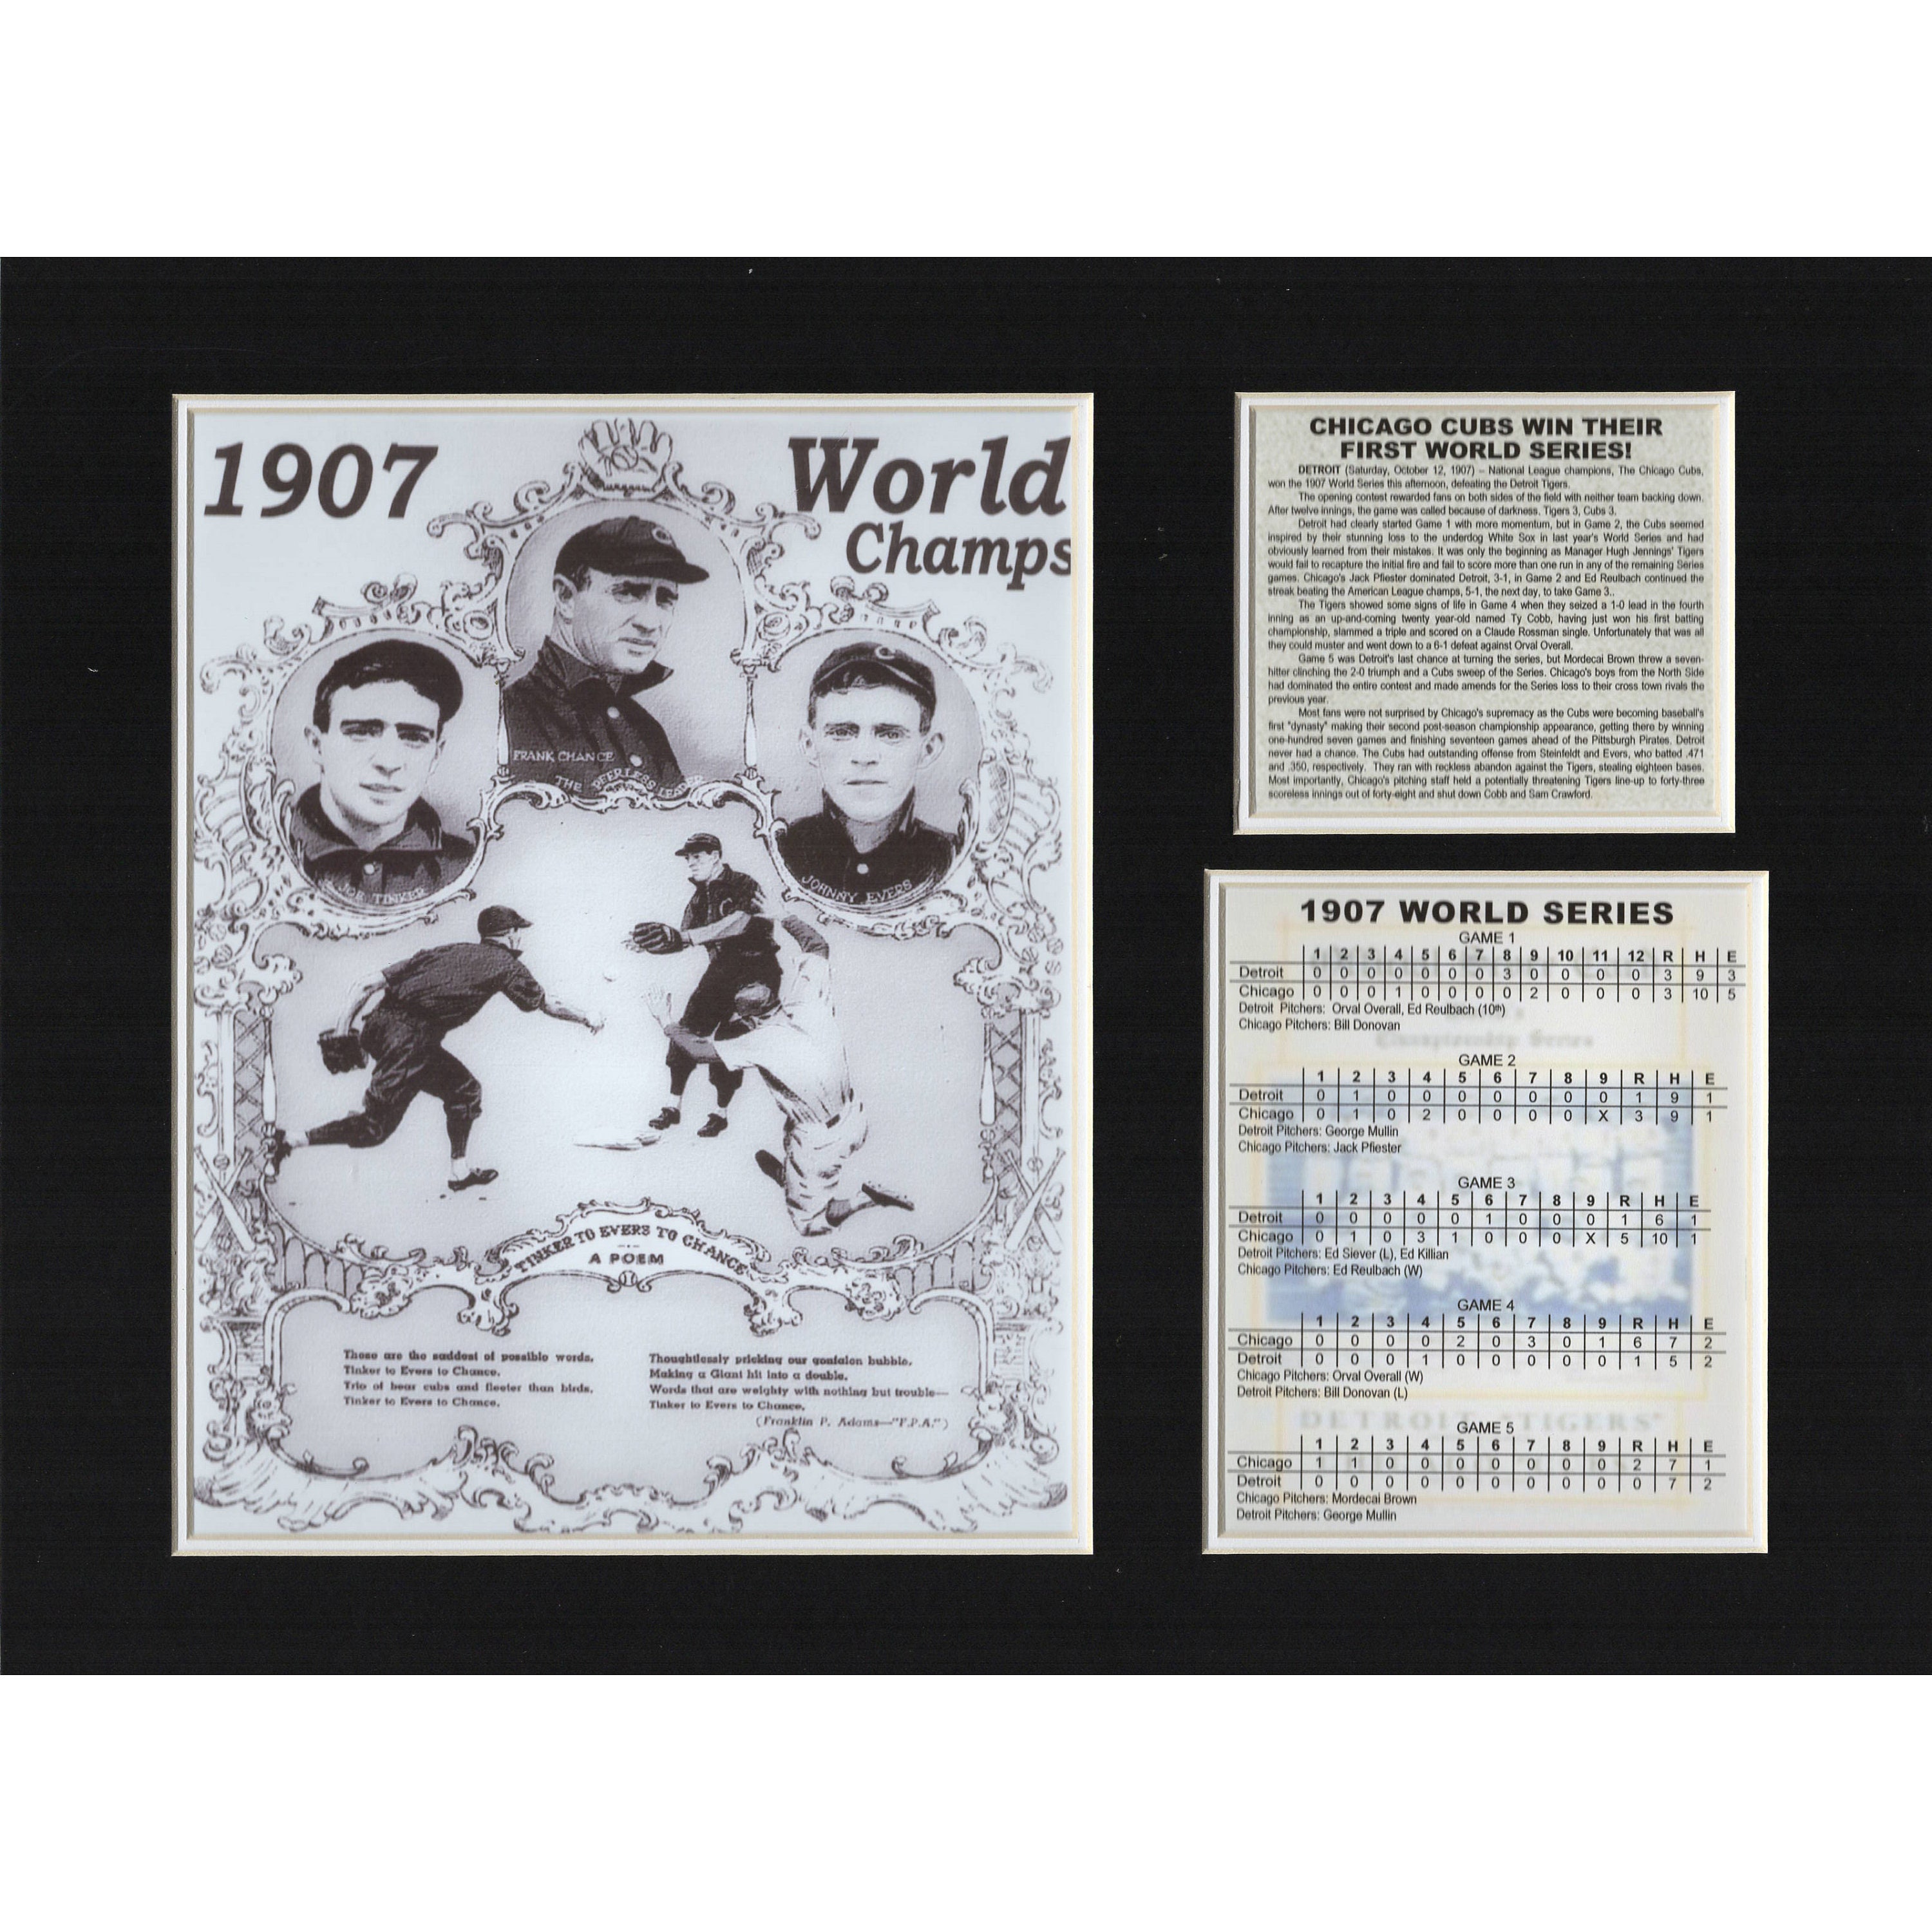 Chicago Cubs win World Series 1907 Tinker-to-Evers-to-Chance Tribute